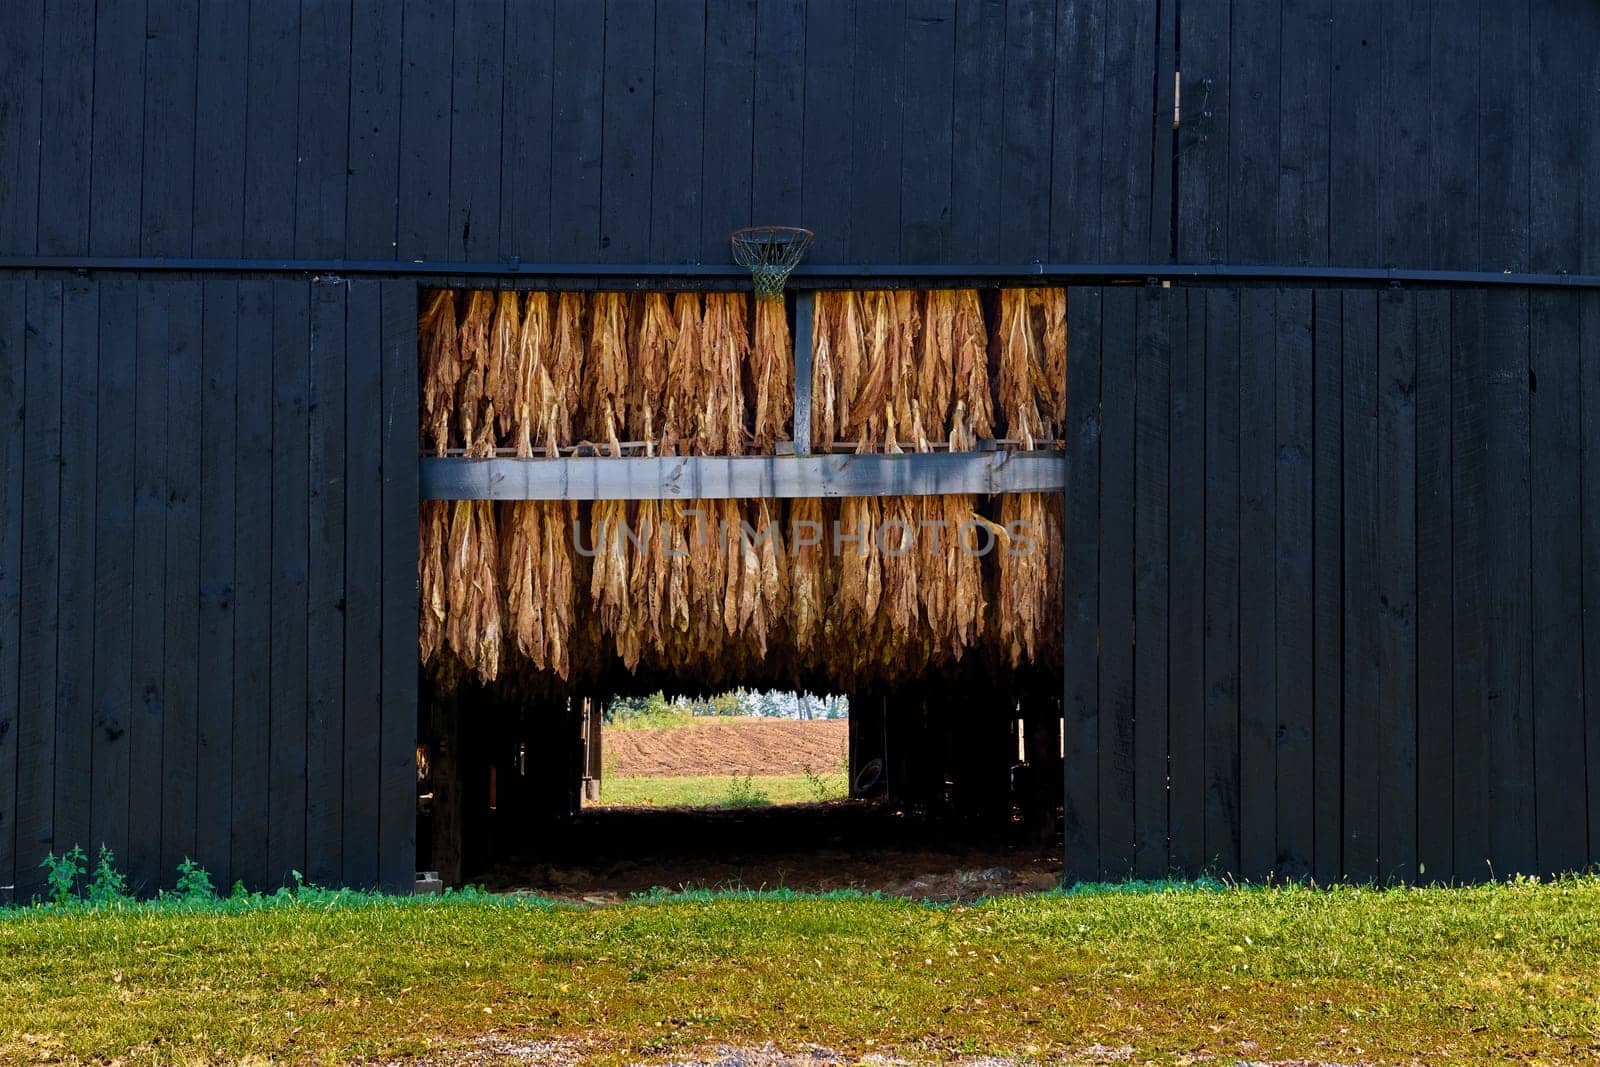 Tobacco hanging in the door of a barn. by patrickstock